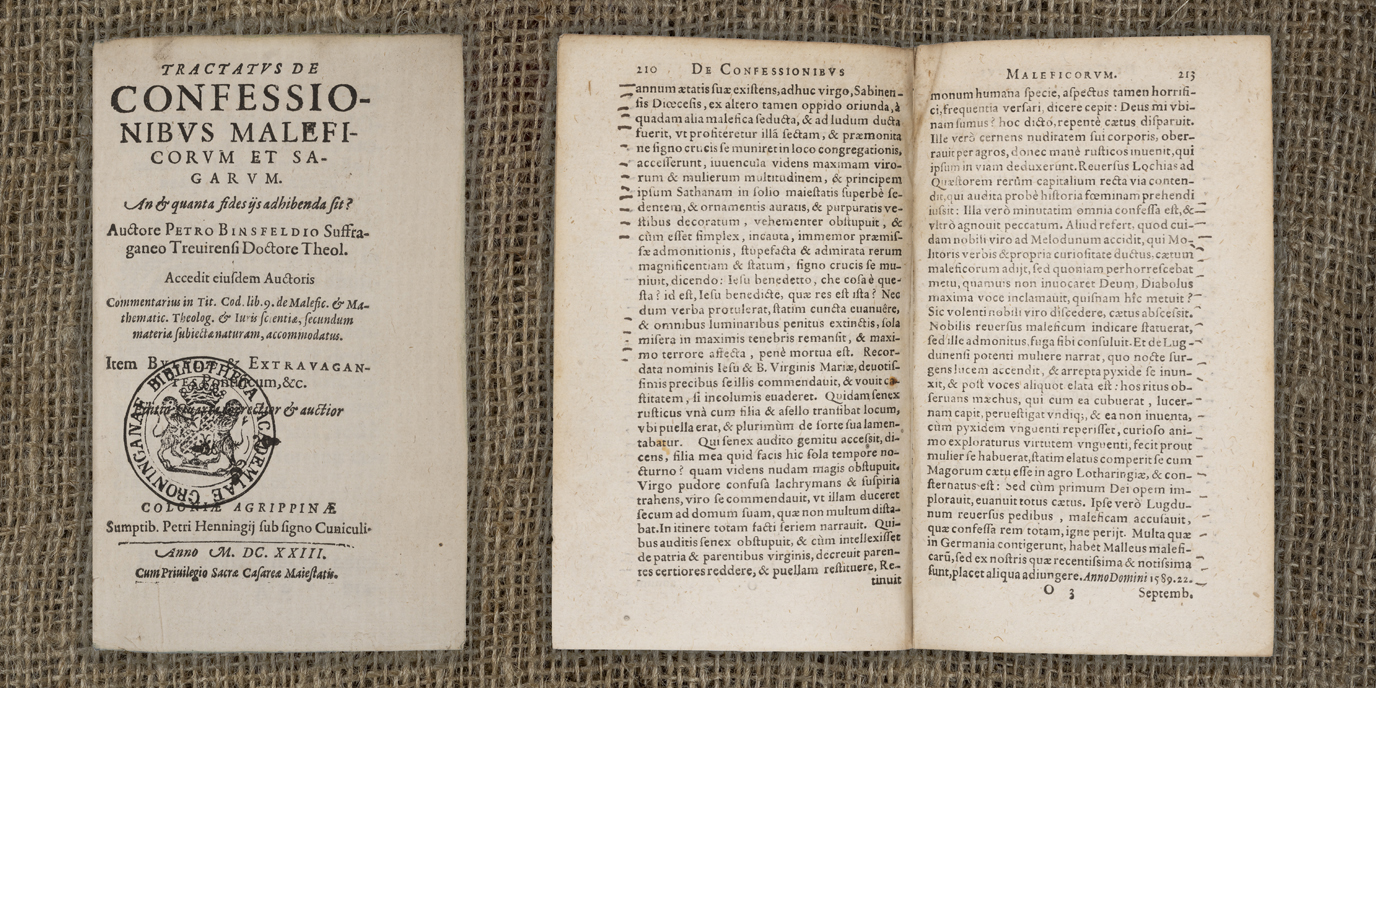 In this 1623 copy of Peter Binsfeld’s 'Tractatus de confessionibus maleficorum et sagarum' (1589), we see small dashes in the margins throughout the book. These dashes could emphasize the importance of certain paragraphs in this treatise on the exposure and prosecution of witches and wizards.